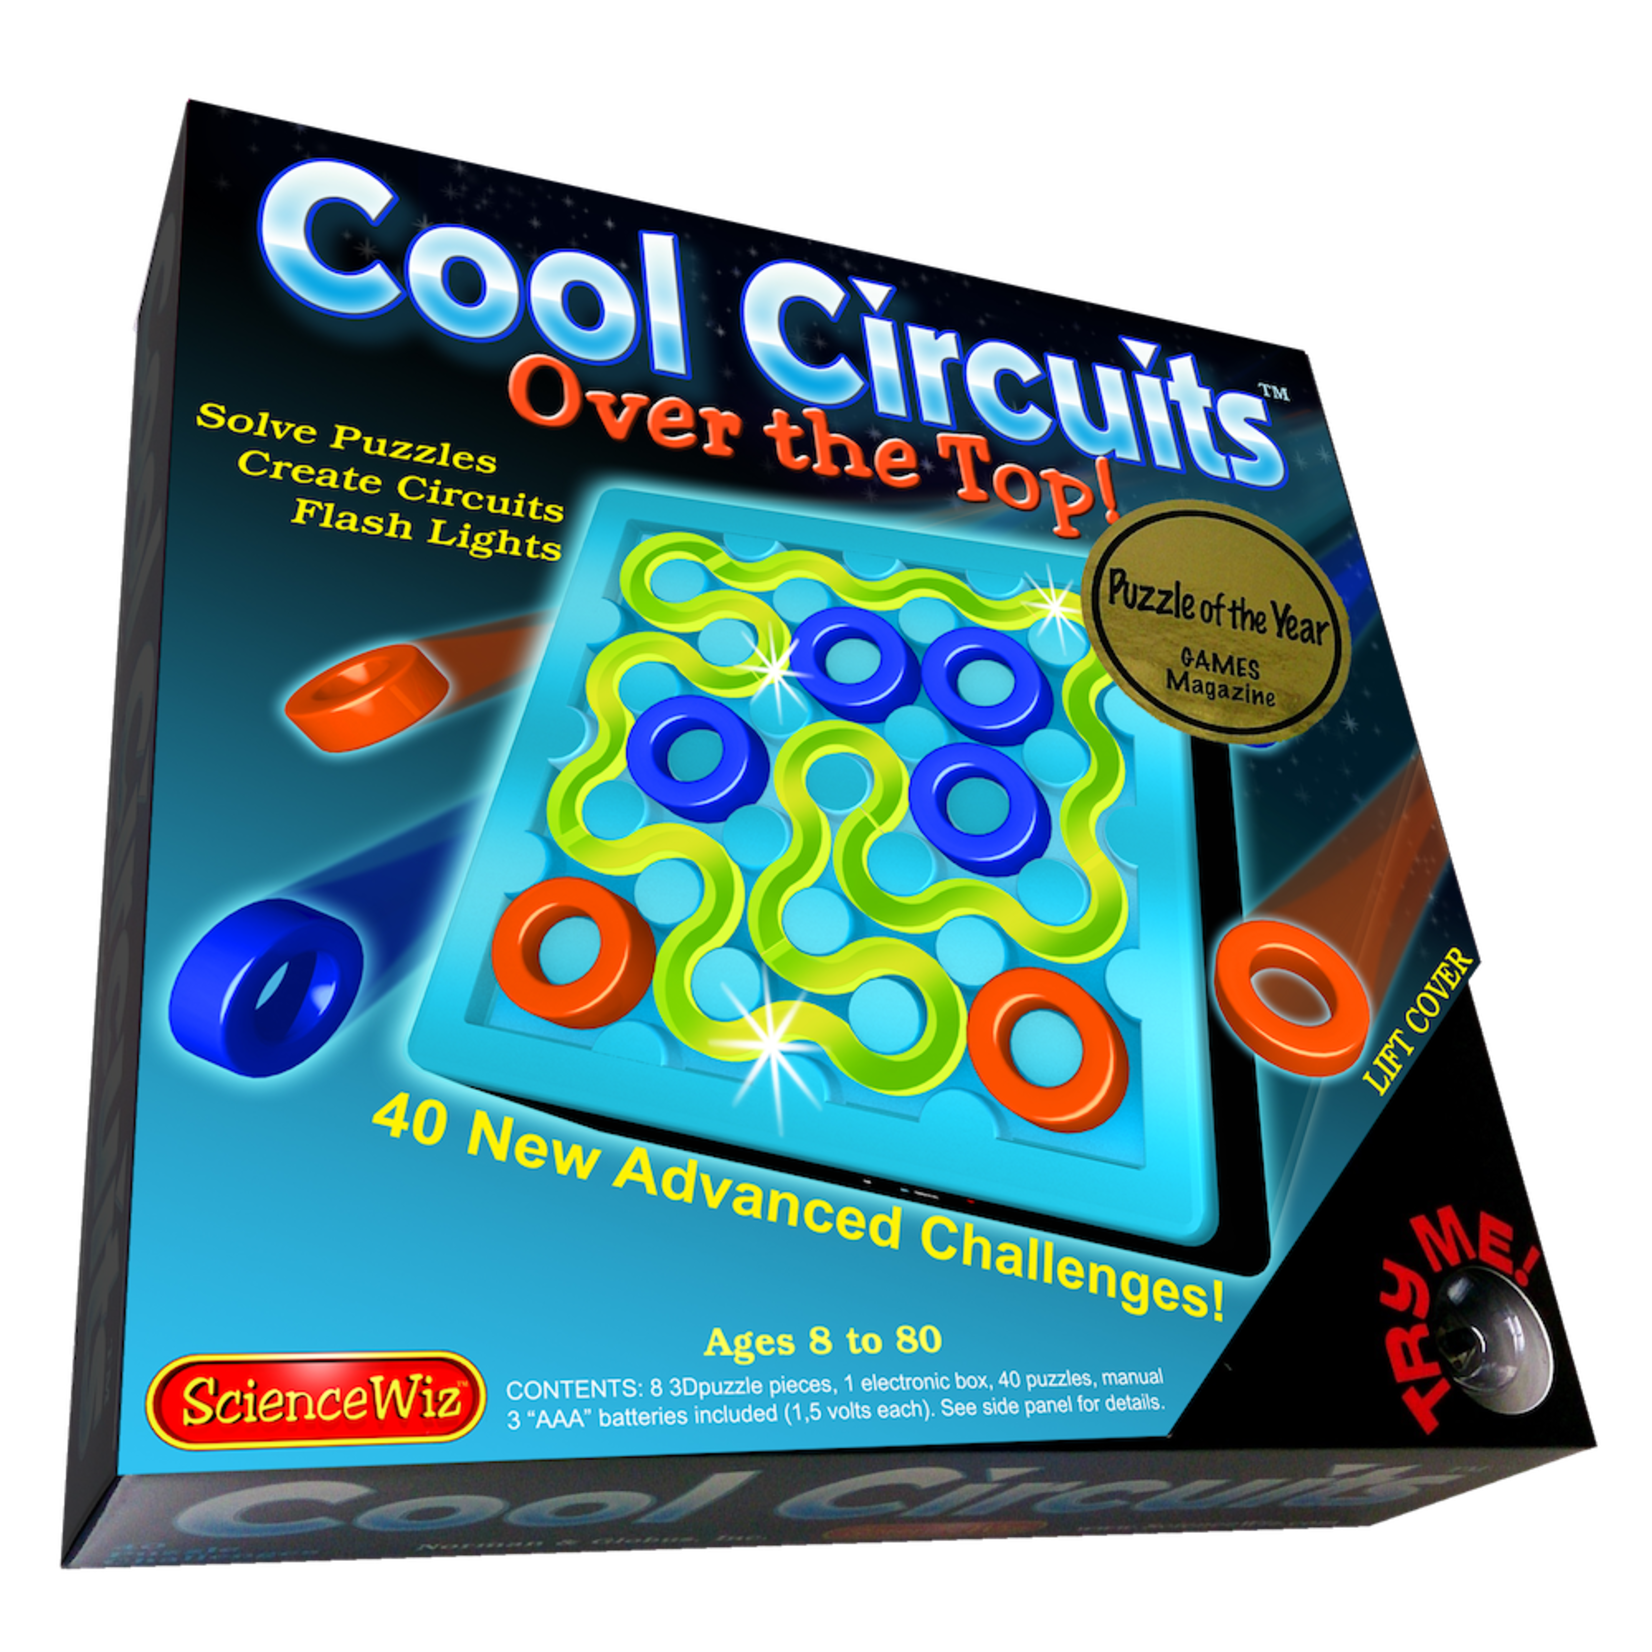 Cool Circuits Over the Top!